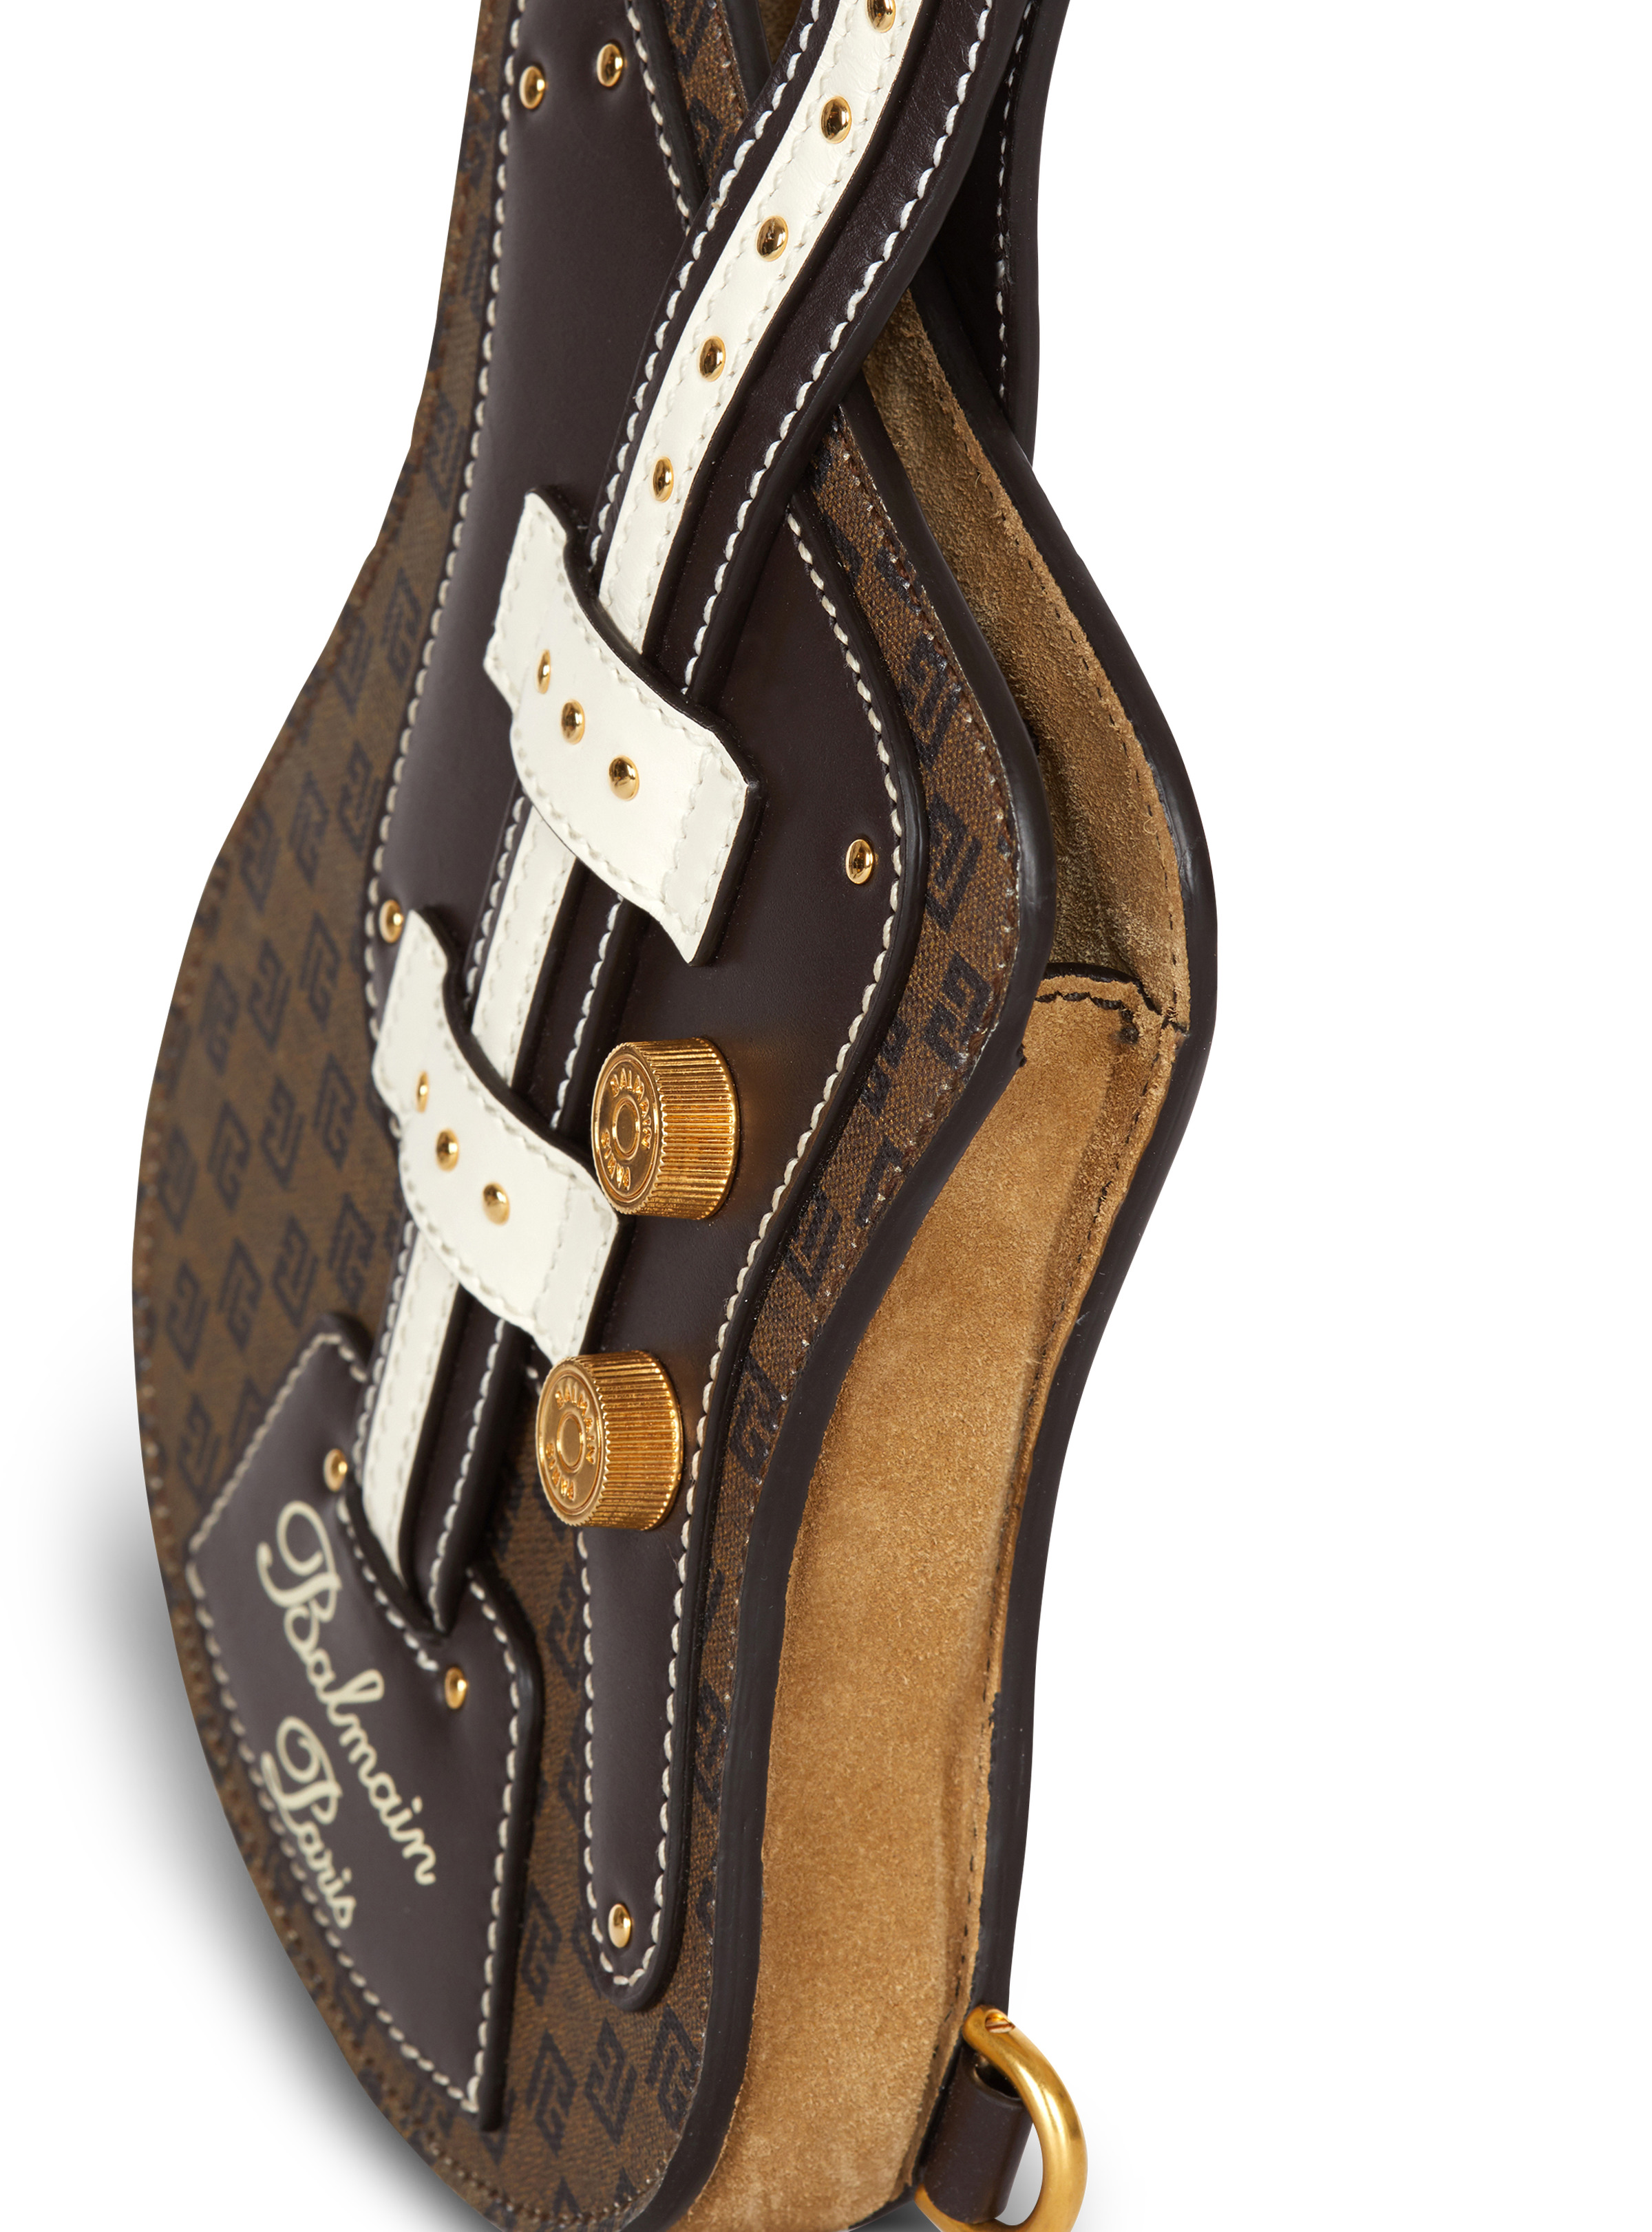 Guitar Bag clutch with leather and monogram detailing - 5